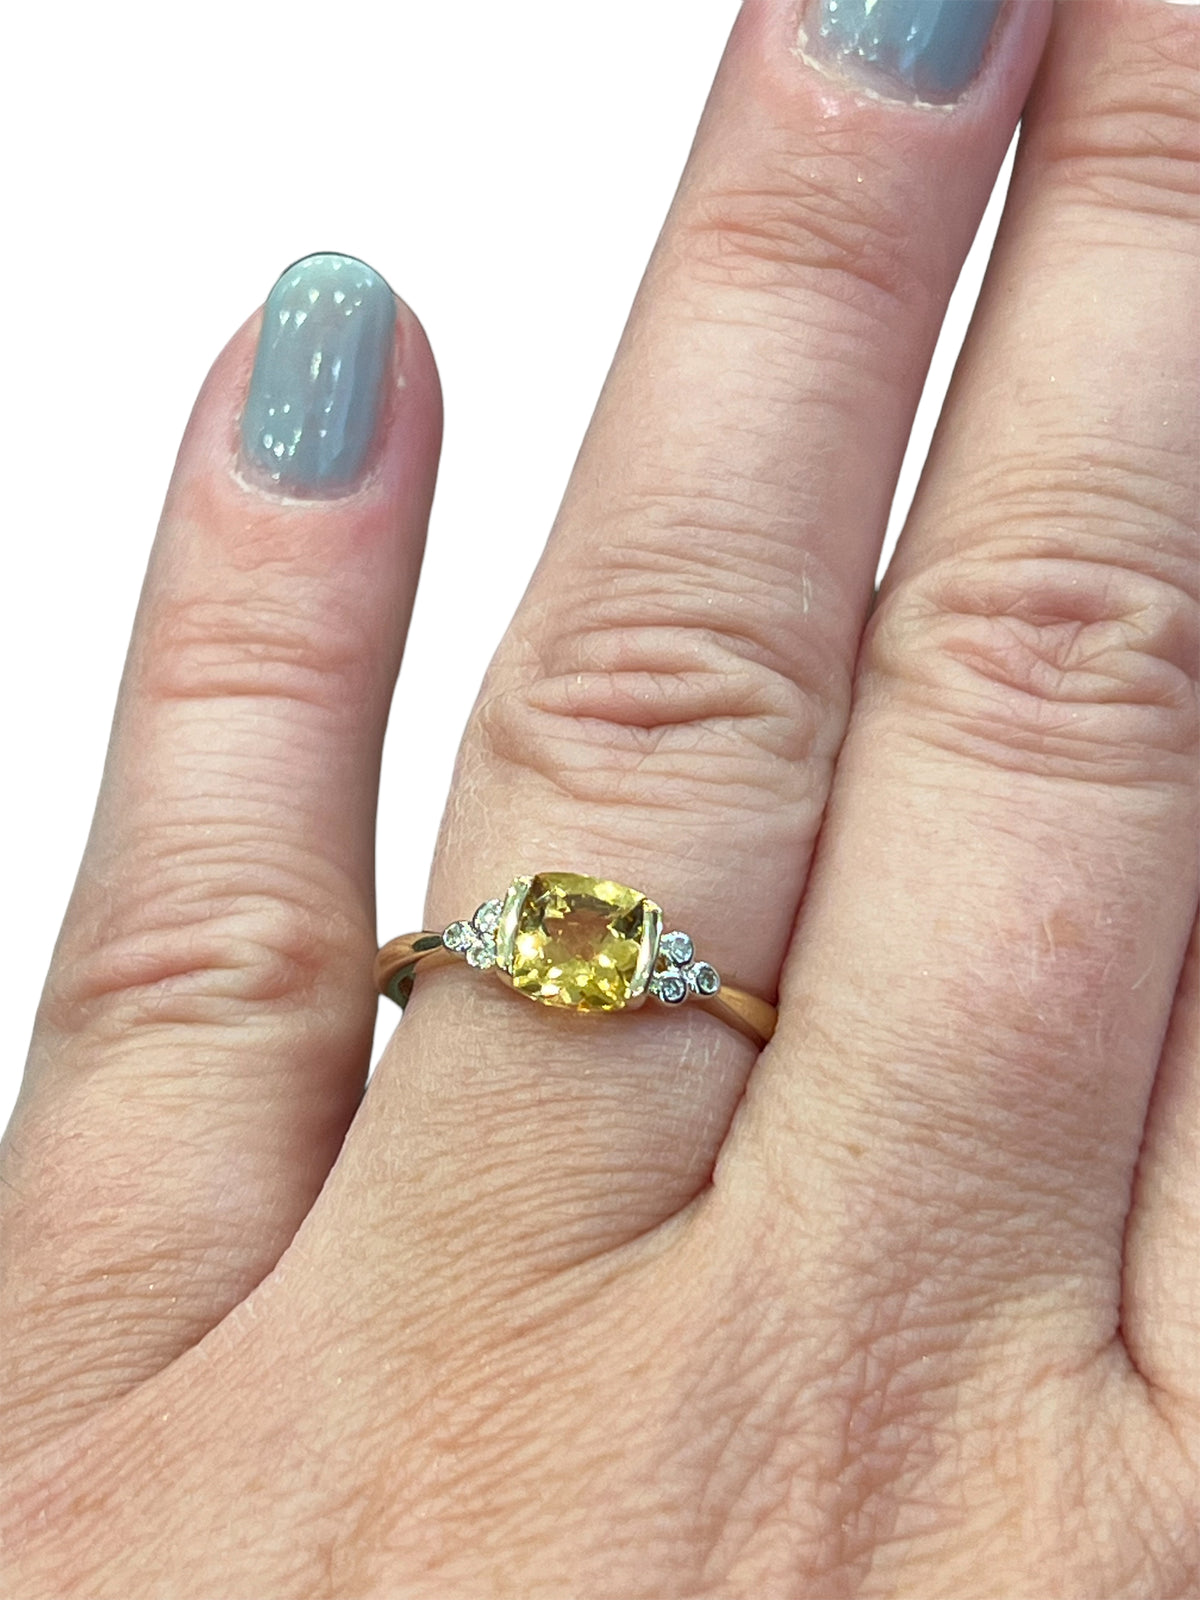 10K Yellow Gold 0.85cttw Citrine and 0.03cttw Diamond Ring - Size 7